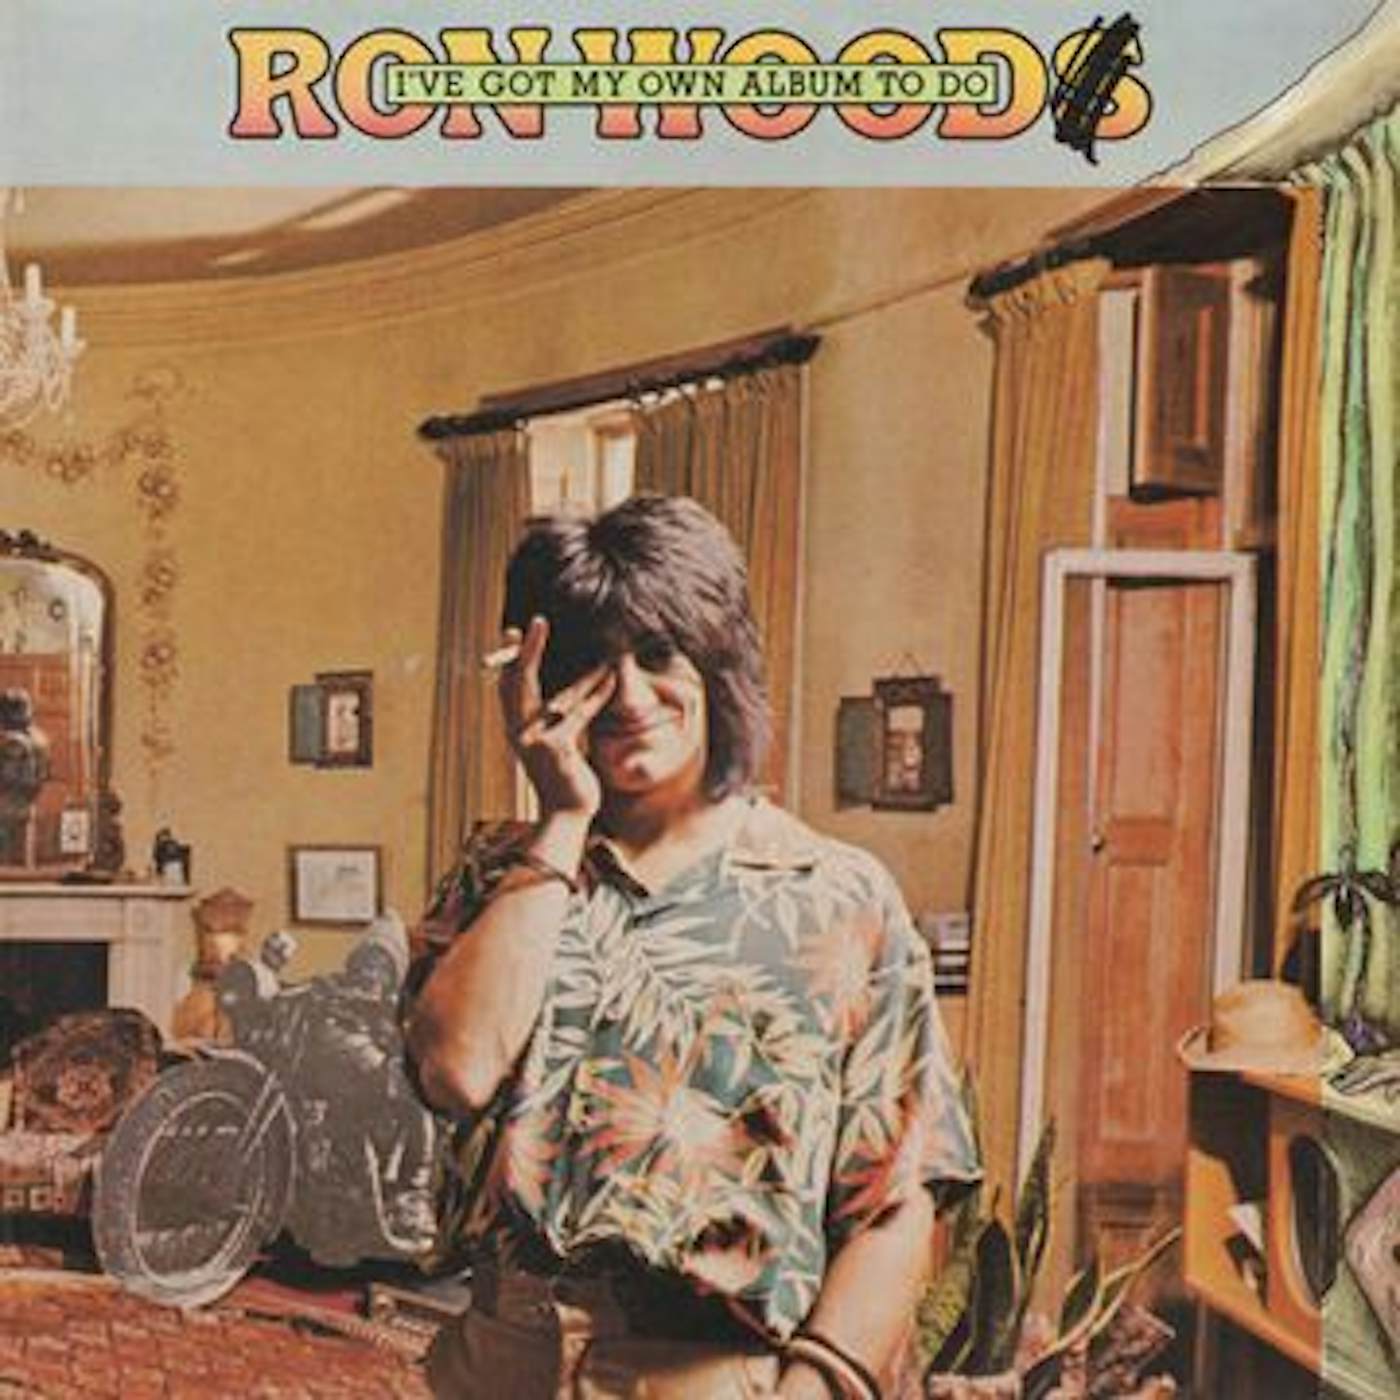 Ronnie Wood I'VE GOT MY OWN ALBUM TO DO (180G/TRANSLUCENT RED AUDIOPHILE VINYL/LIMITED ANNIVERSARY EDITION) Vinyl Record